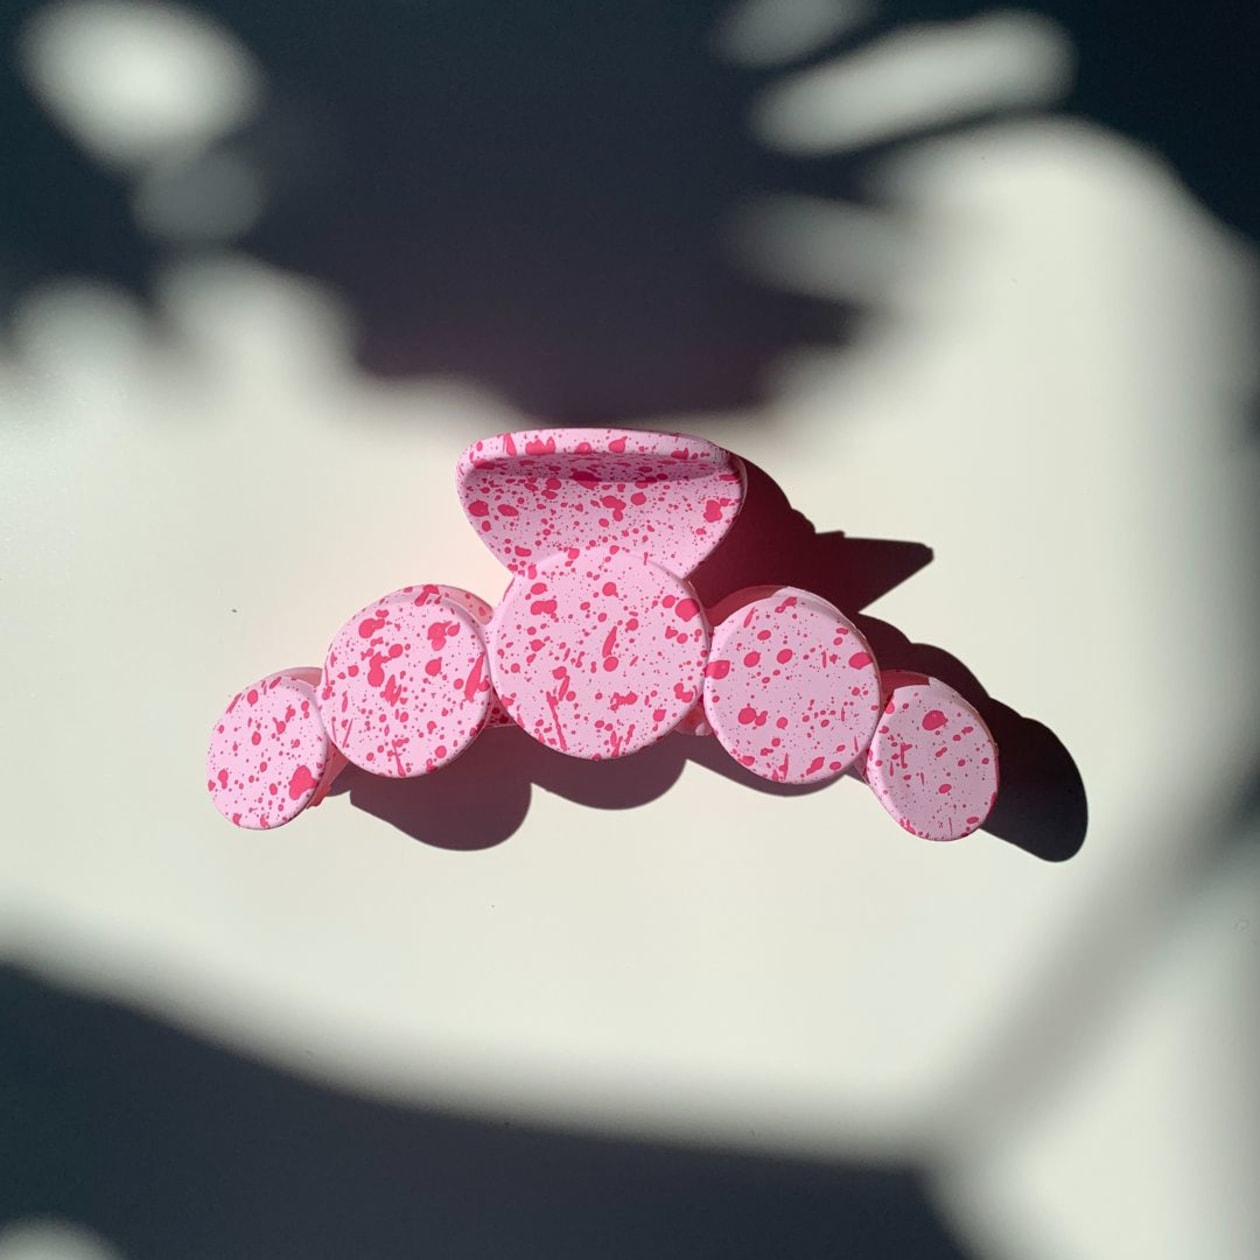 Velvet Claws Hair Clip | The Freckle in Pink | Claw Clip in Velvet Travel Bag